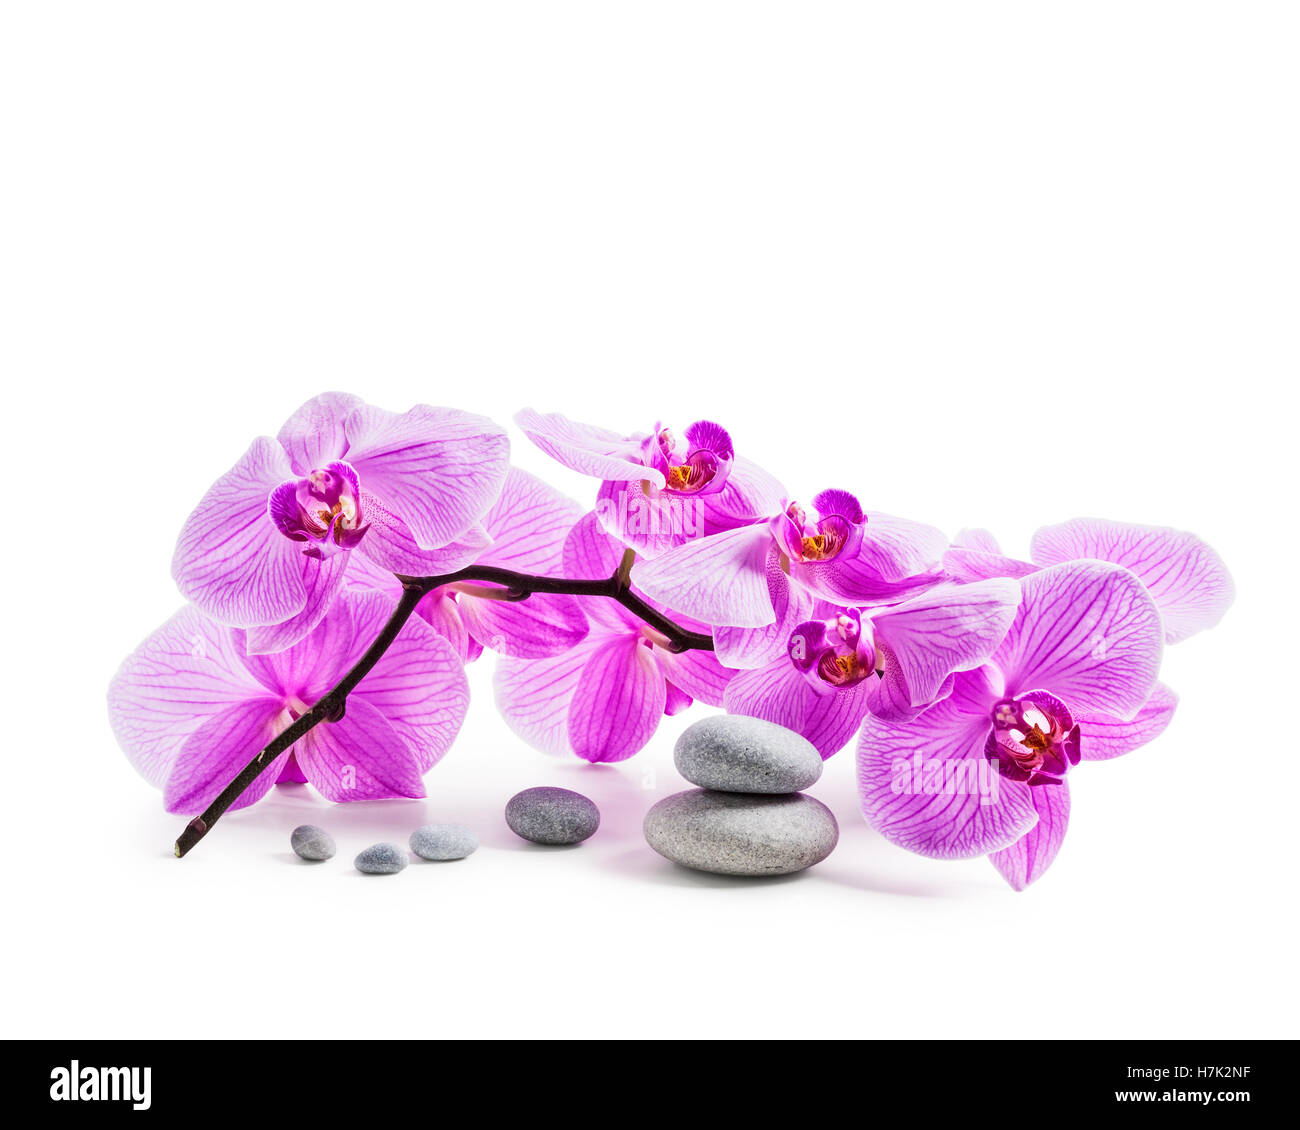 Pink orchid flowers and spa stones isolated on white background clipping path included Stock Photo